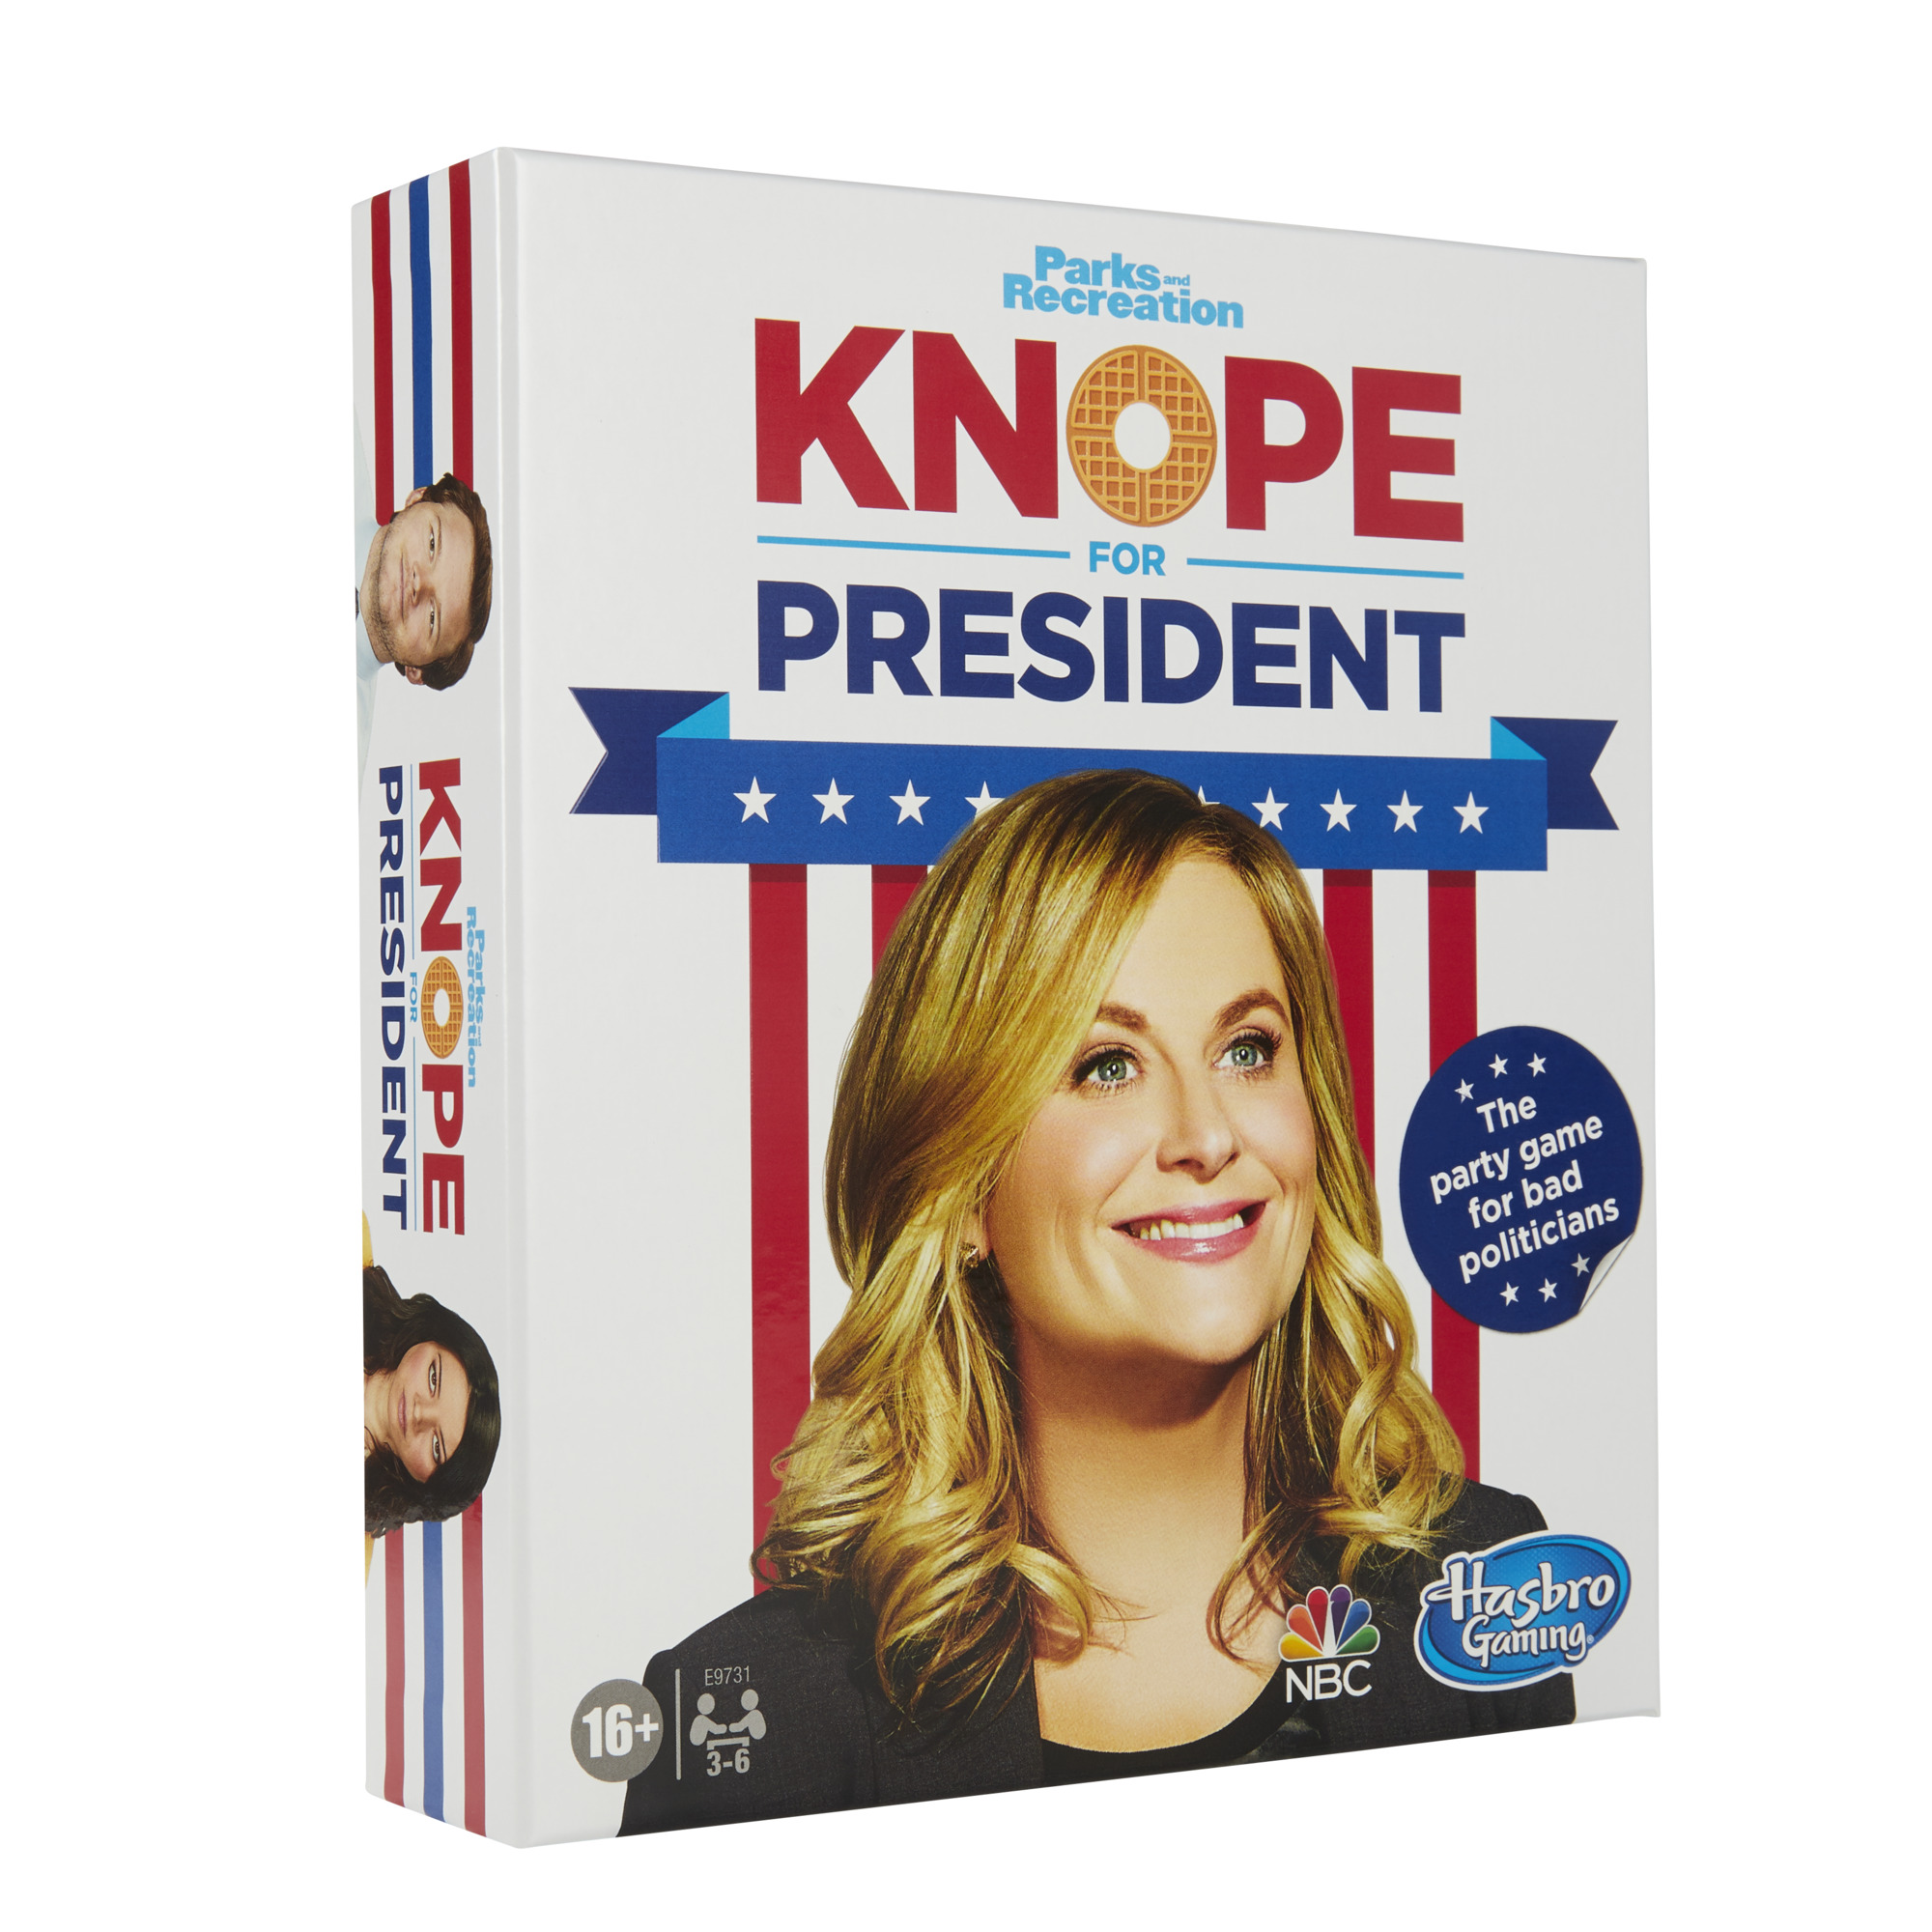 DEAD Knope For President (Parks & Rec) Party Card Game $2.27 Walmart.com